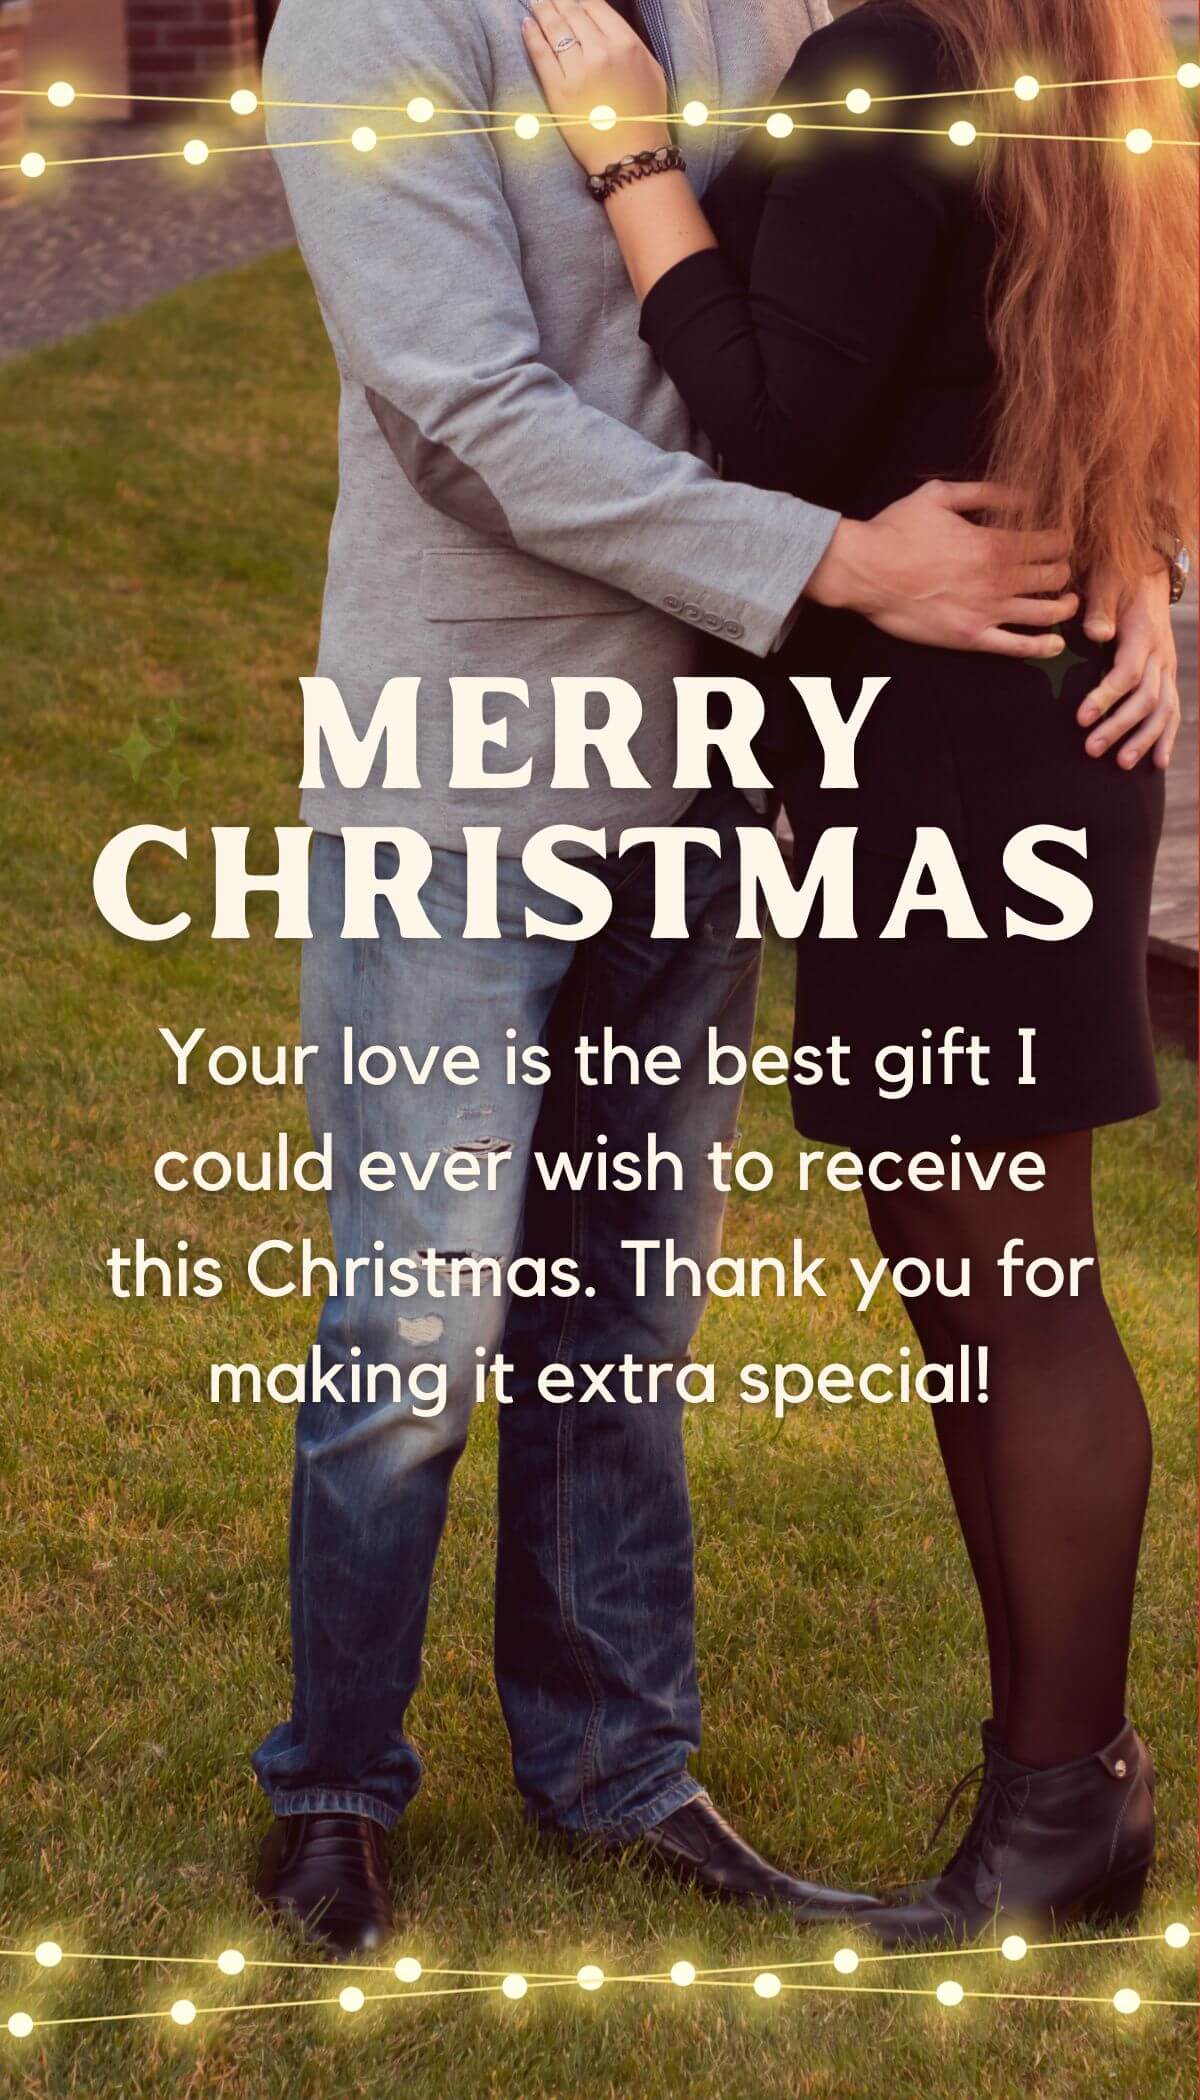 Merry Christmas Messages For My Girlfriend